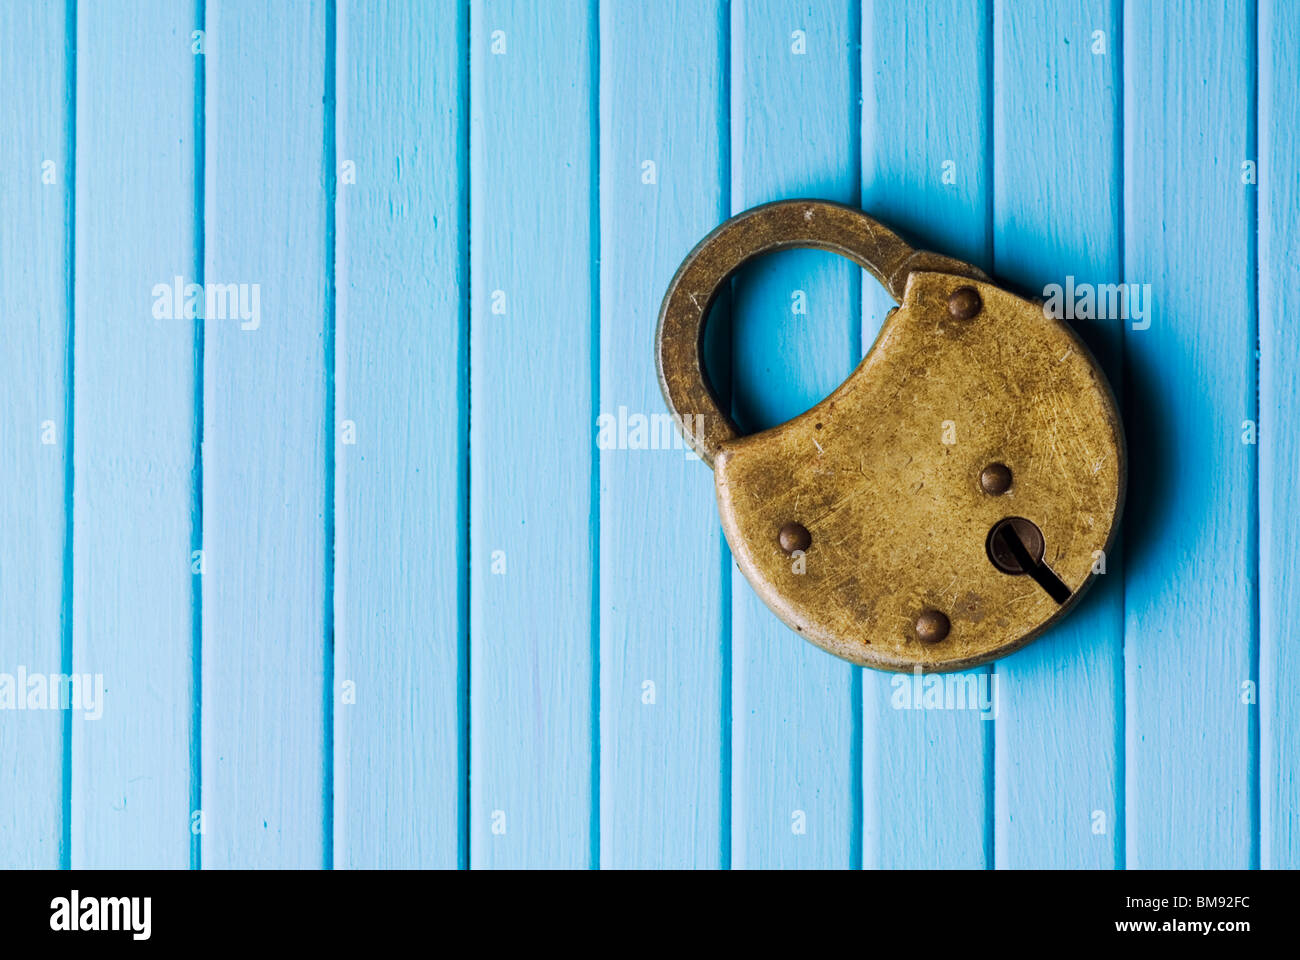 Old fashioned padlock on a blue wooden background Stock Photo